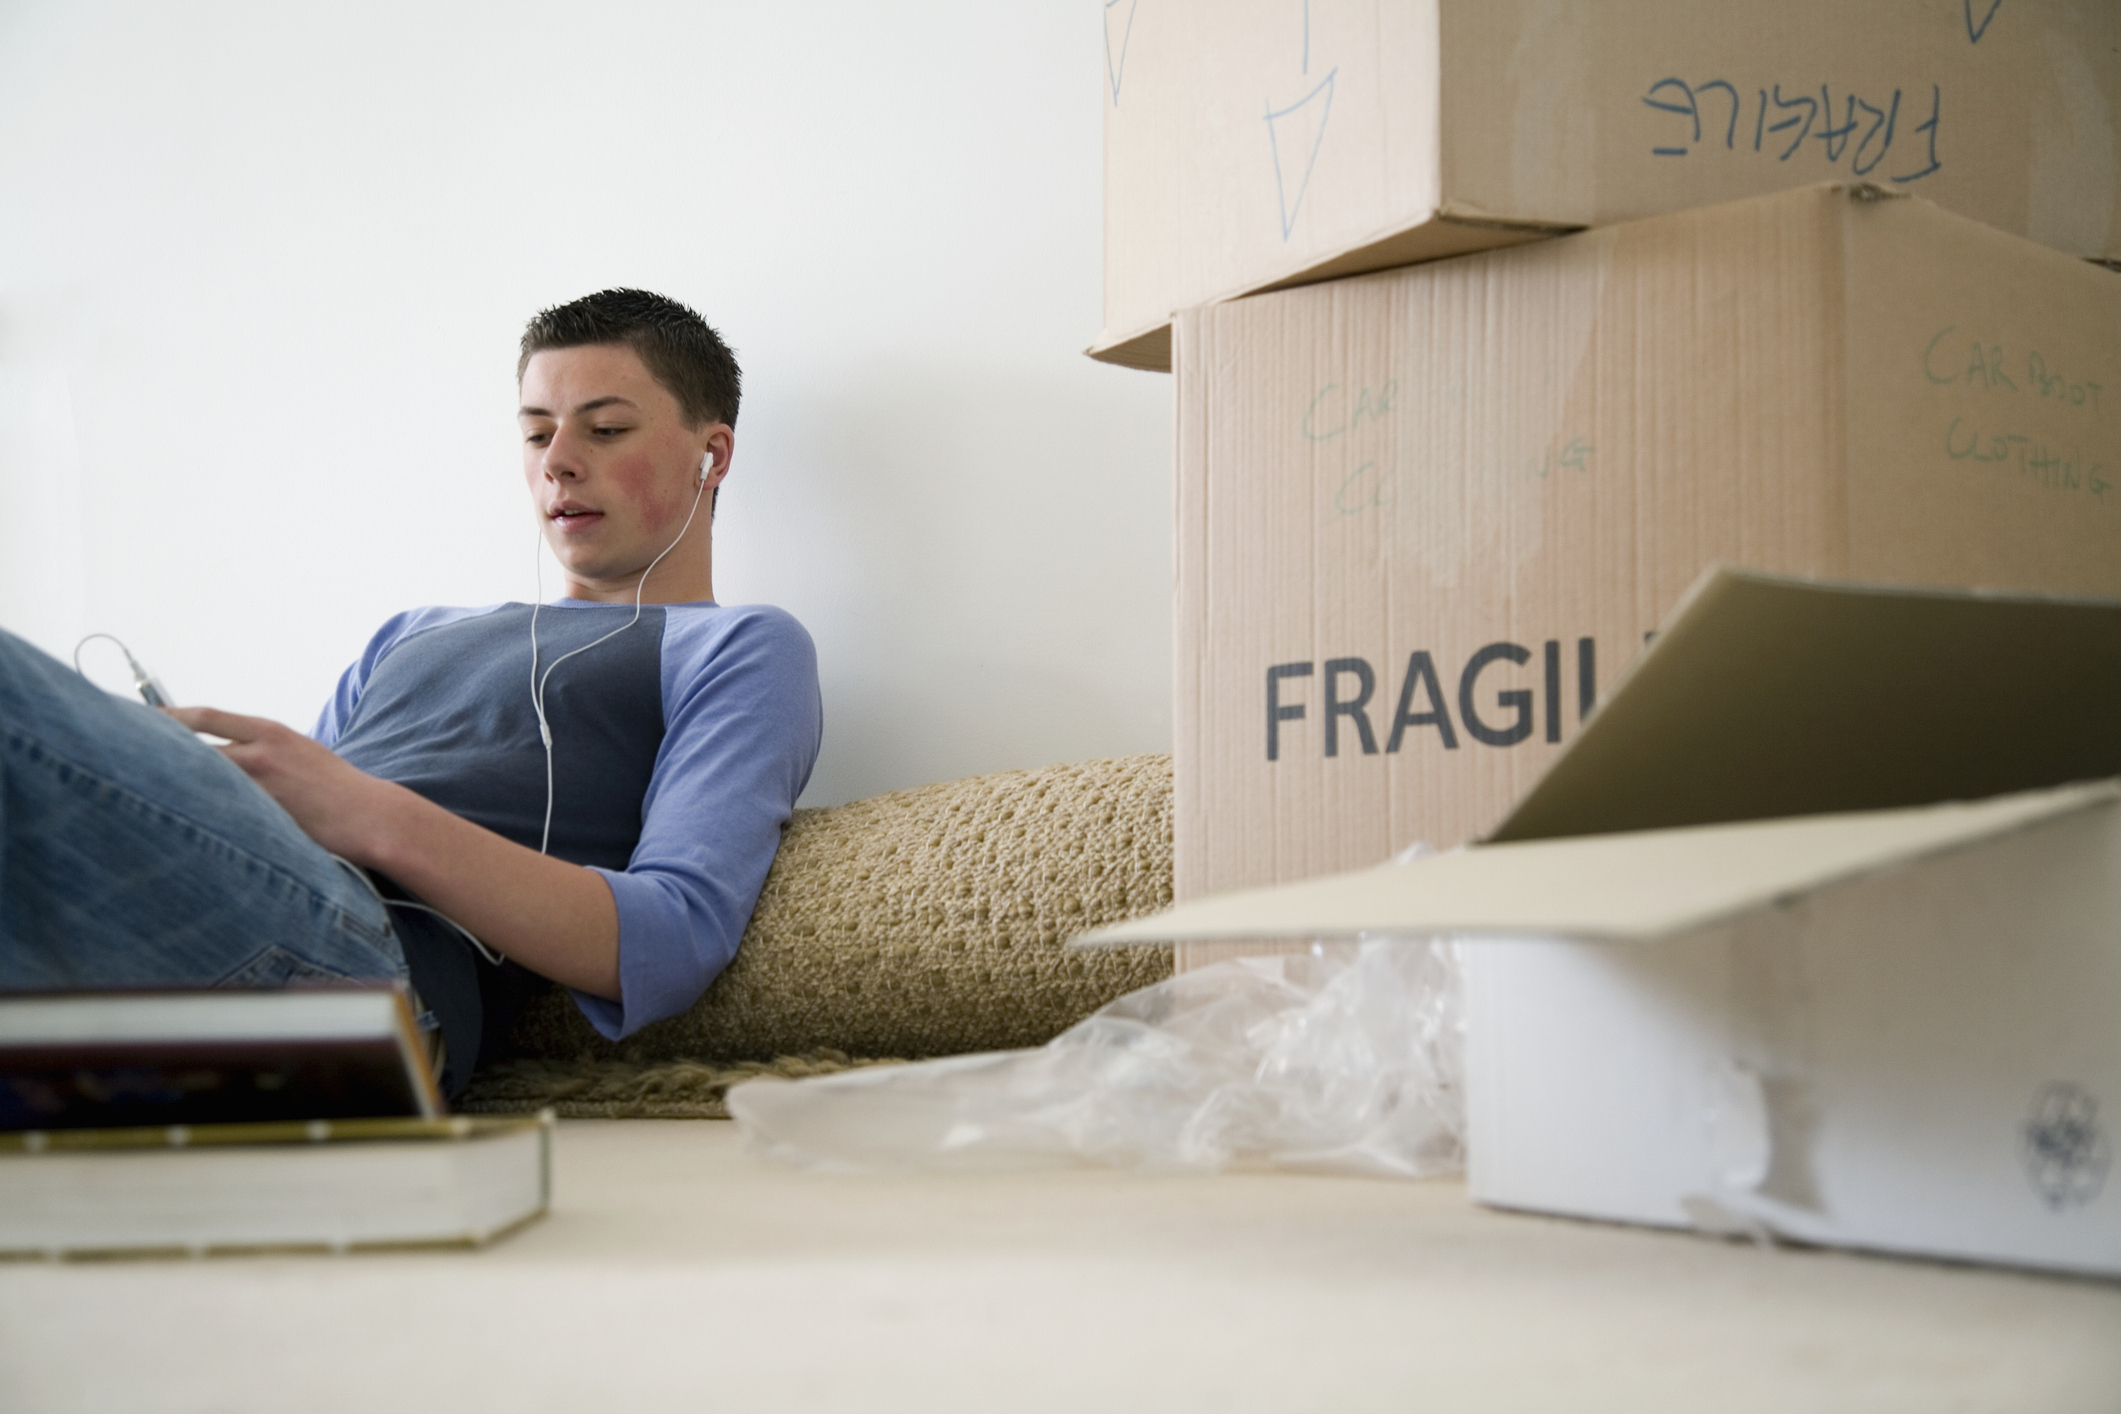 Person sitting on the floor, surrounded by moving boxes, using a device with earphones